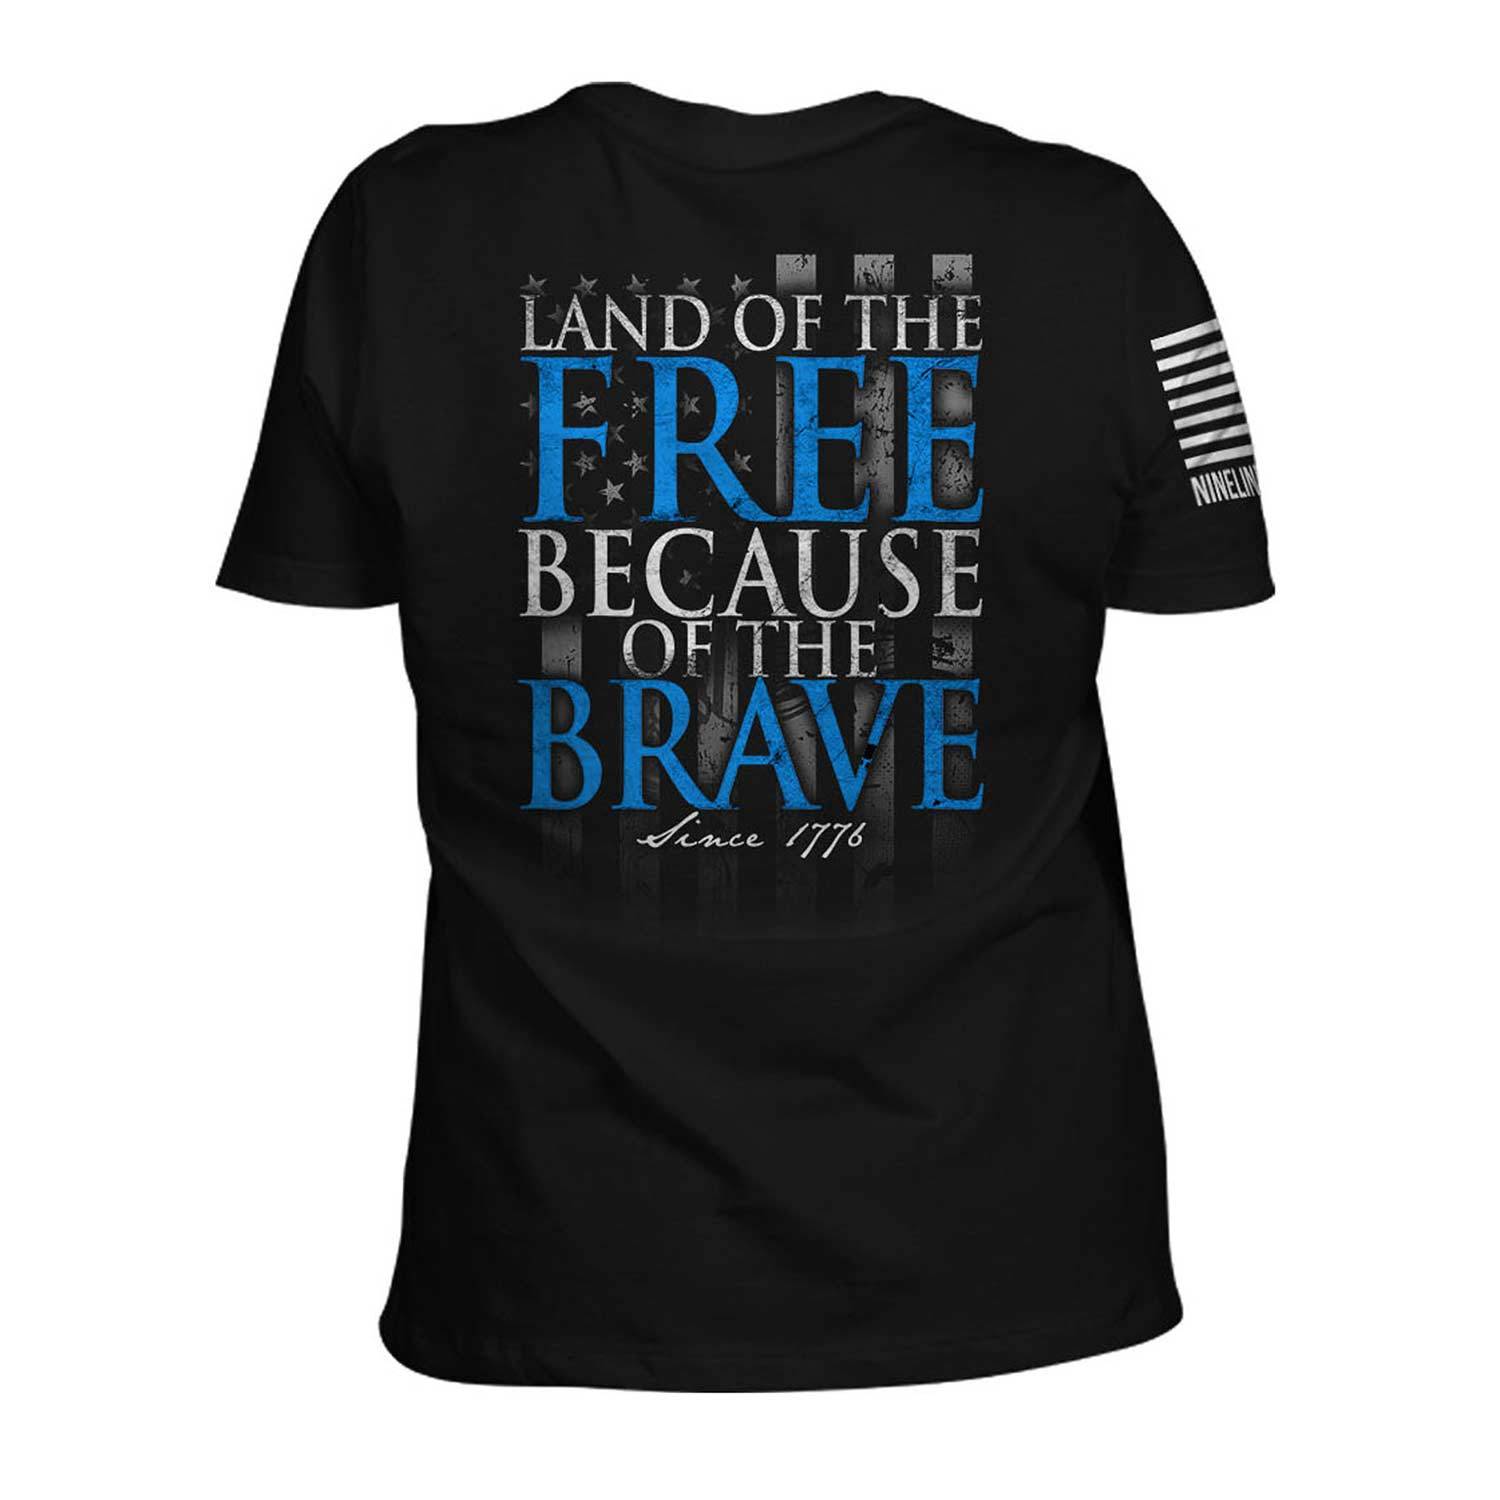 NINE LINE WOMEN’S BECAUSE OF THE BRAVE T-SHIRT